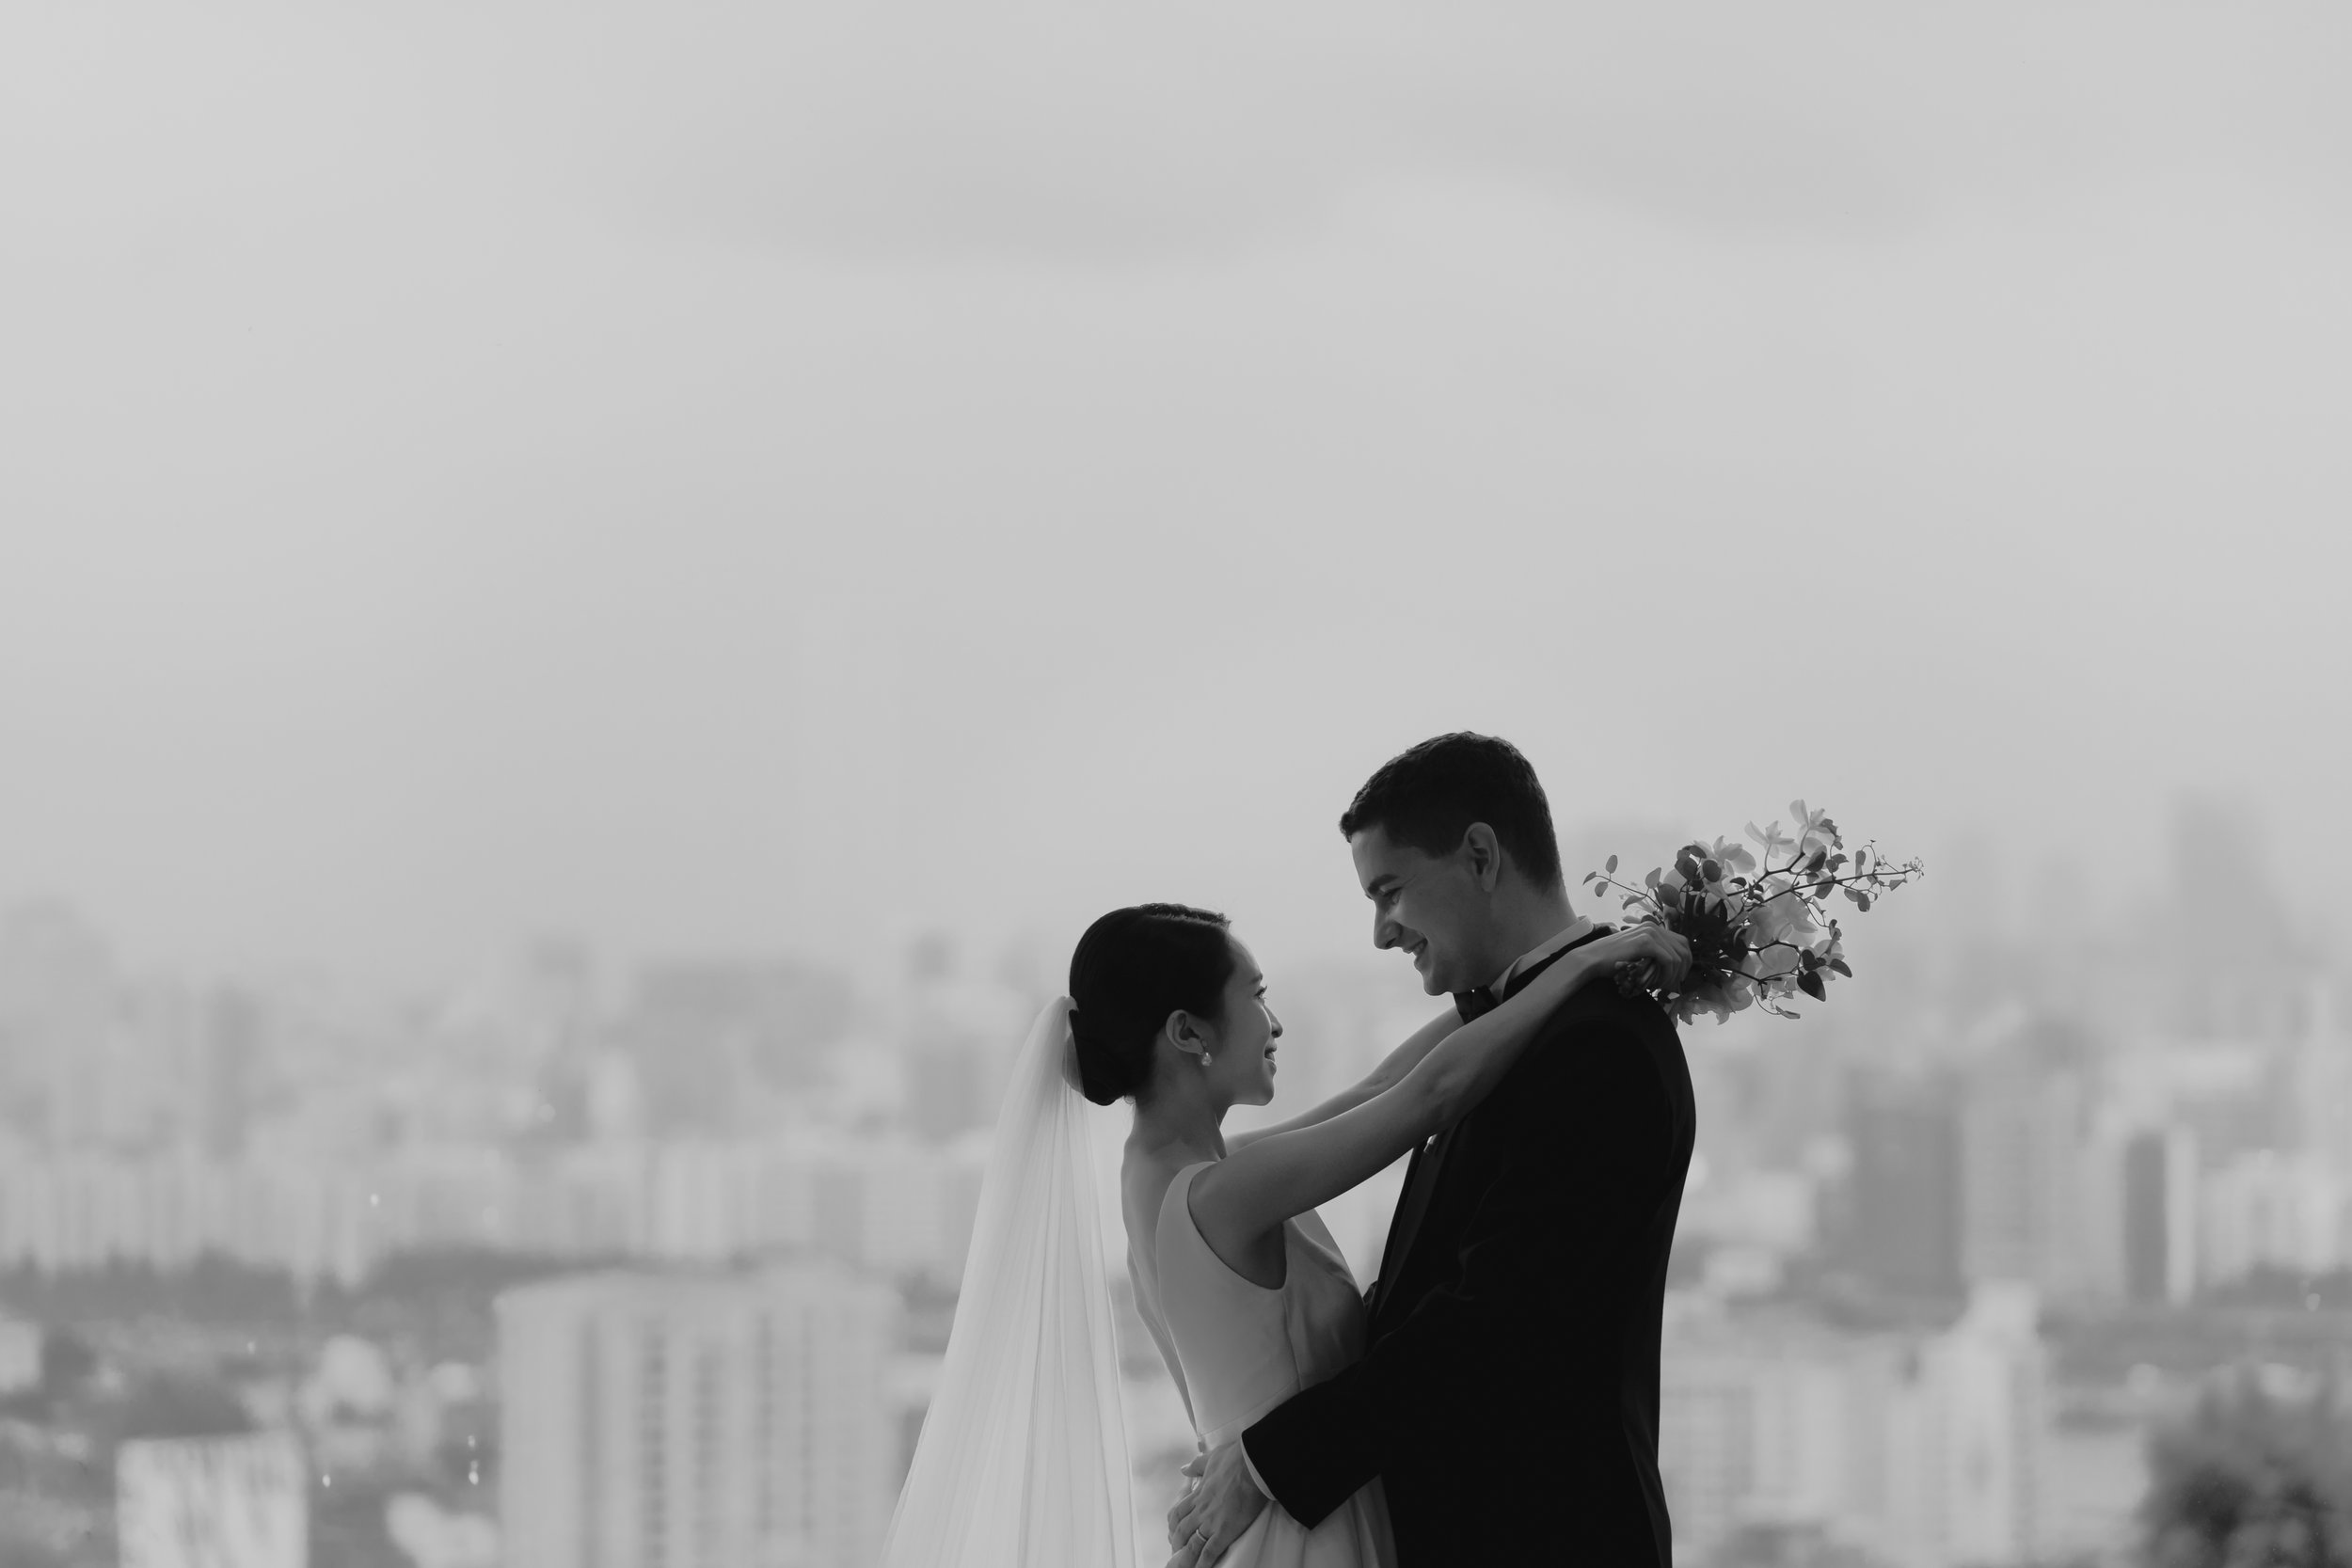 a bride and groom on their wedding day in Seoul